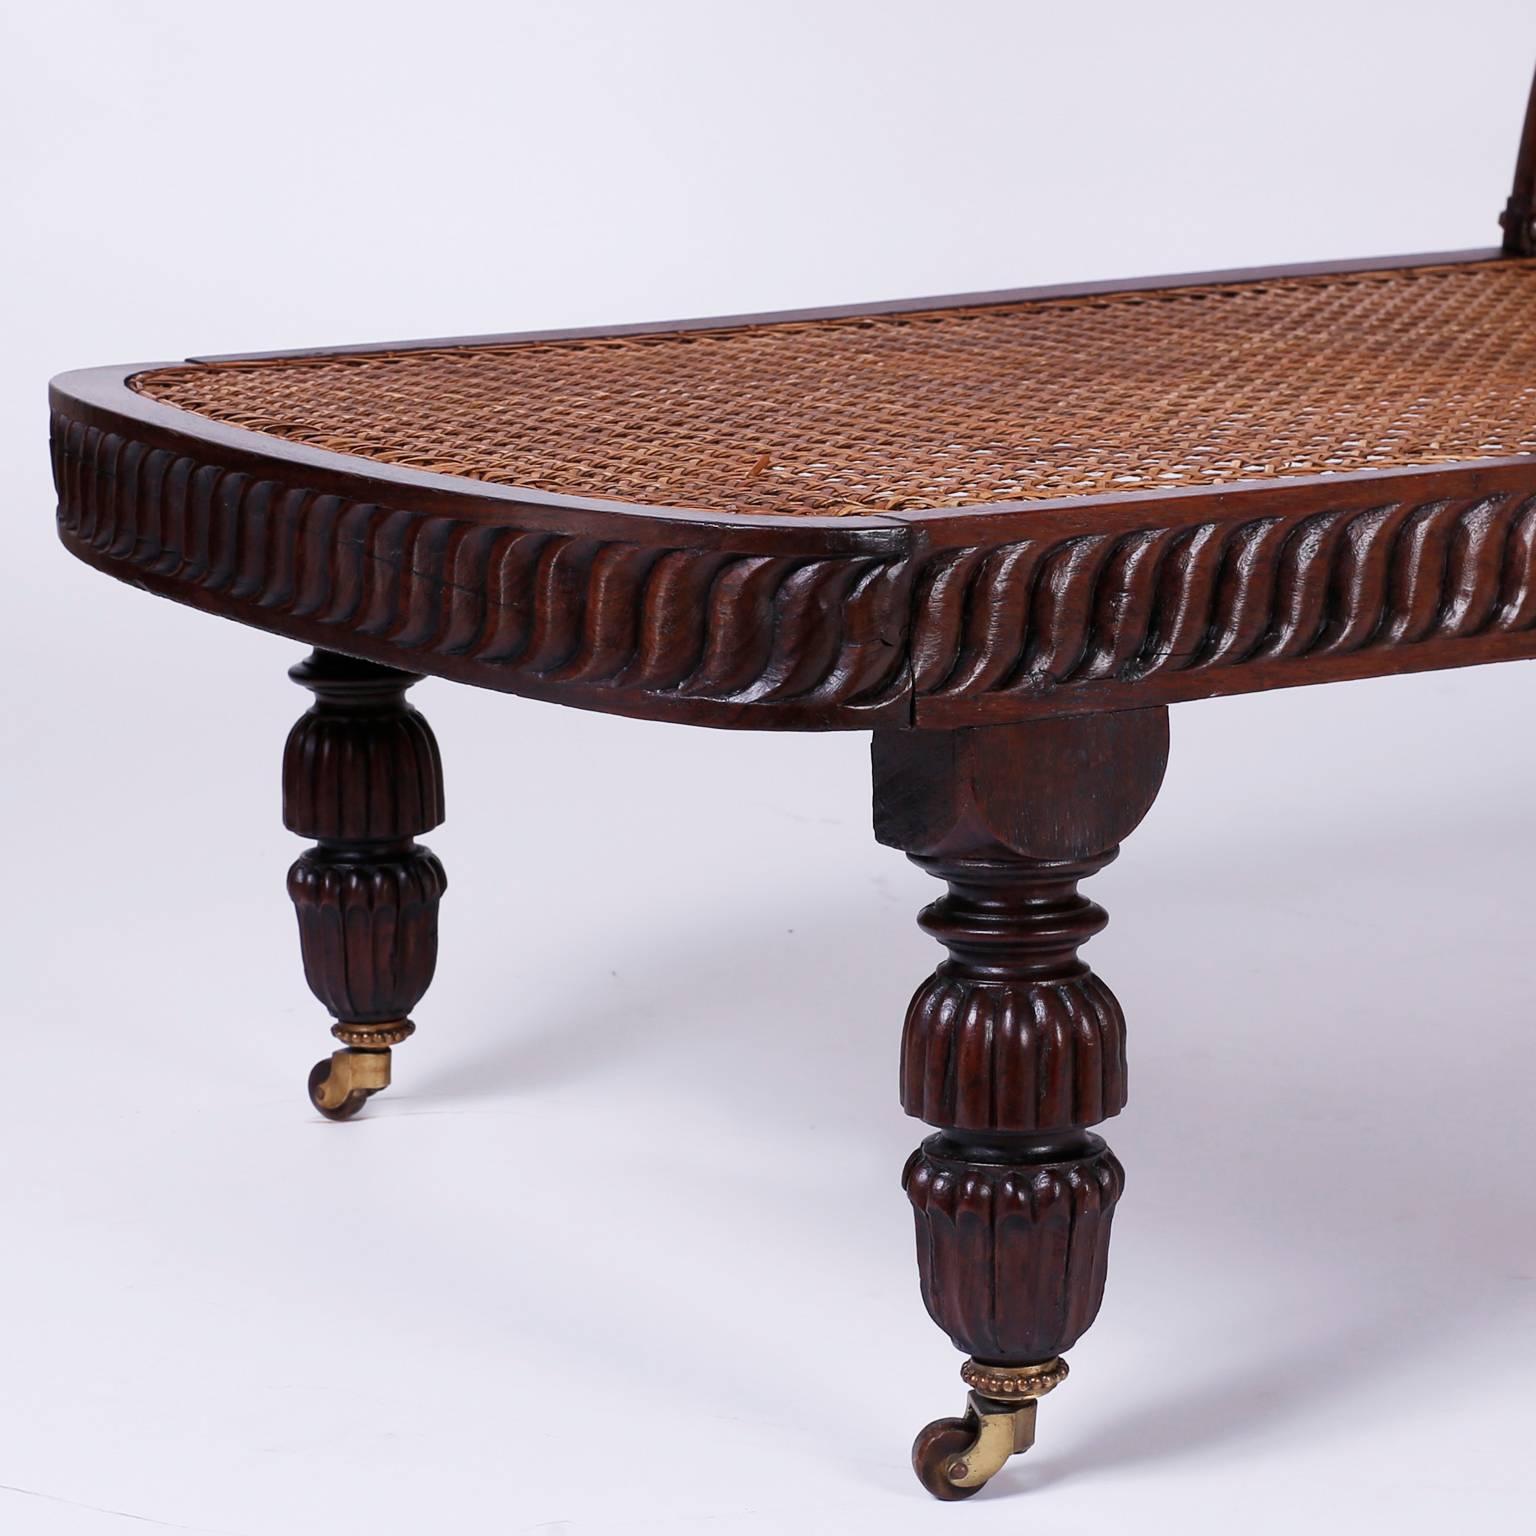 Spirited carved mahogany chaise or recamier, from the West Indies, with elegant classic form. Inspired by the sea with graceful wavy lines and carved nautilus shells surrounding a star medallion. Hand caned seat, back, and side over four double